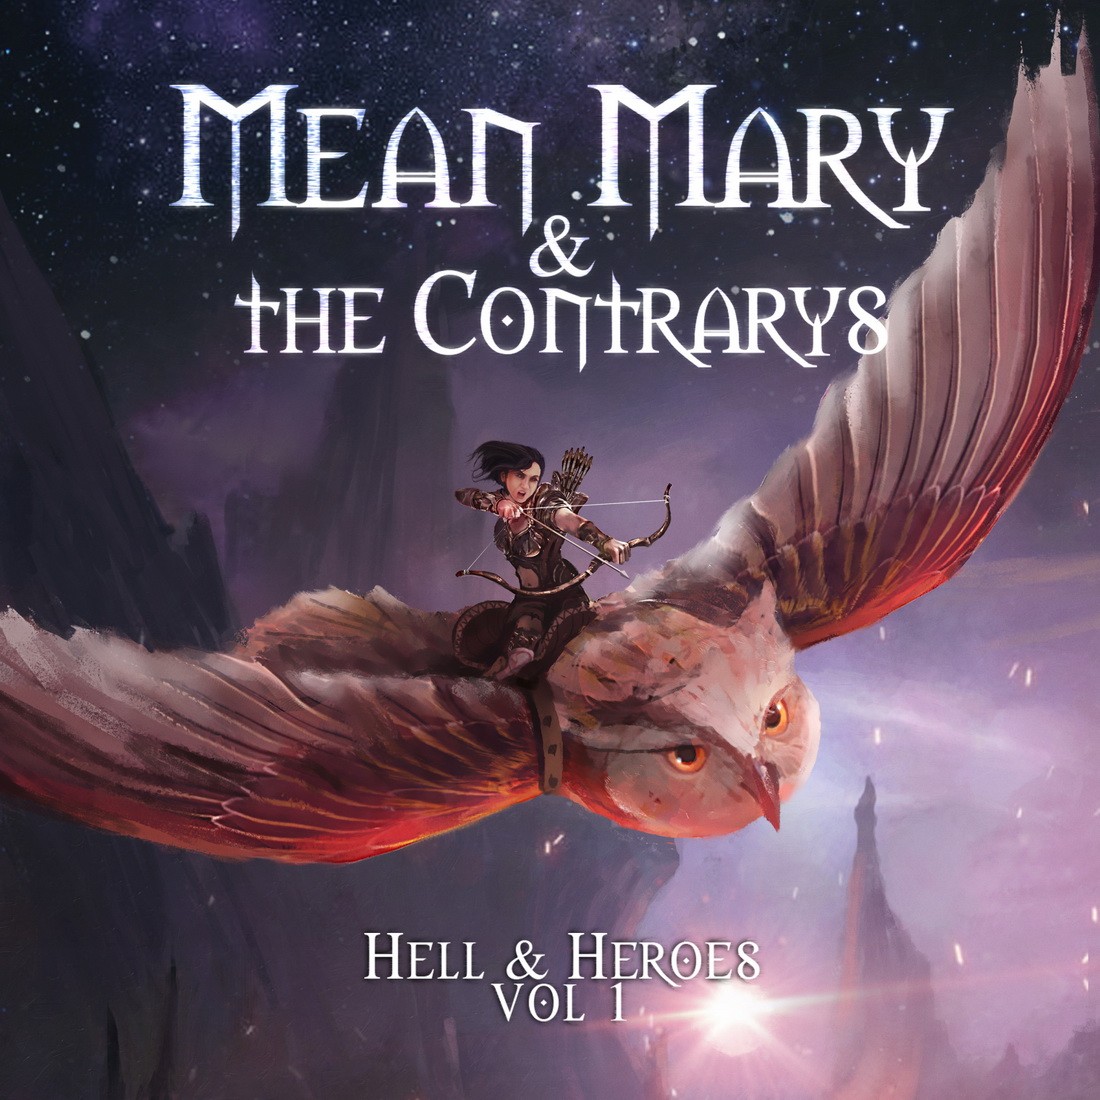 Mean Mary & The Contrarys - Hell & Heroes Vol 1